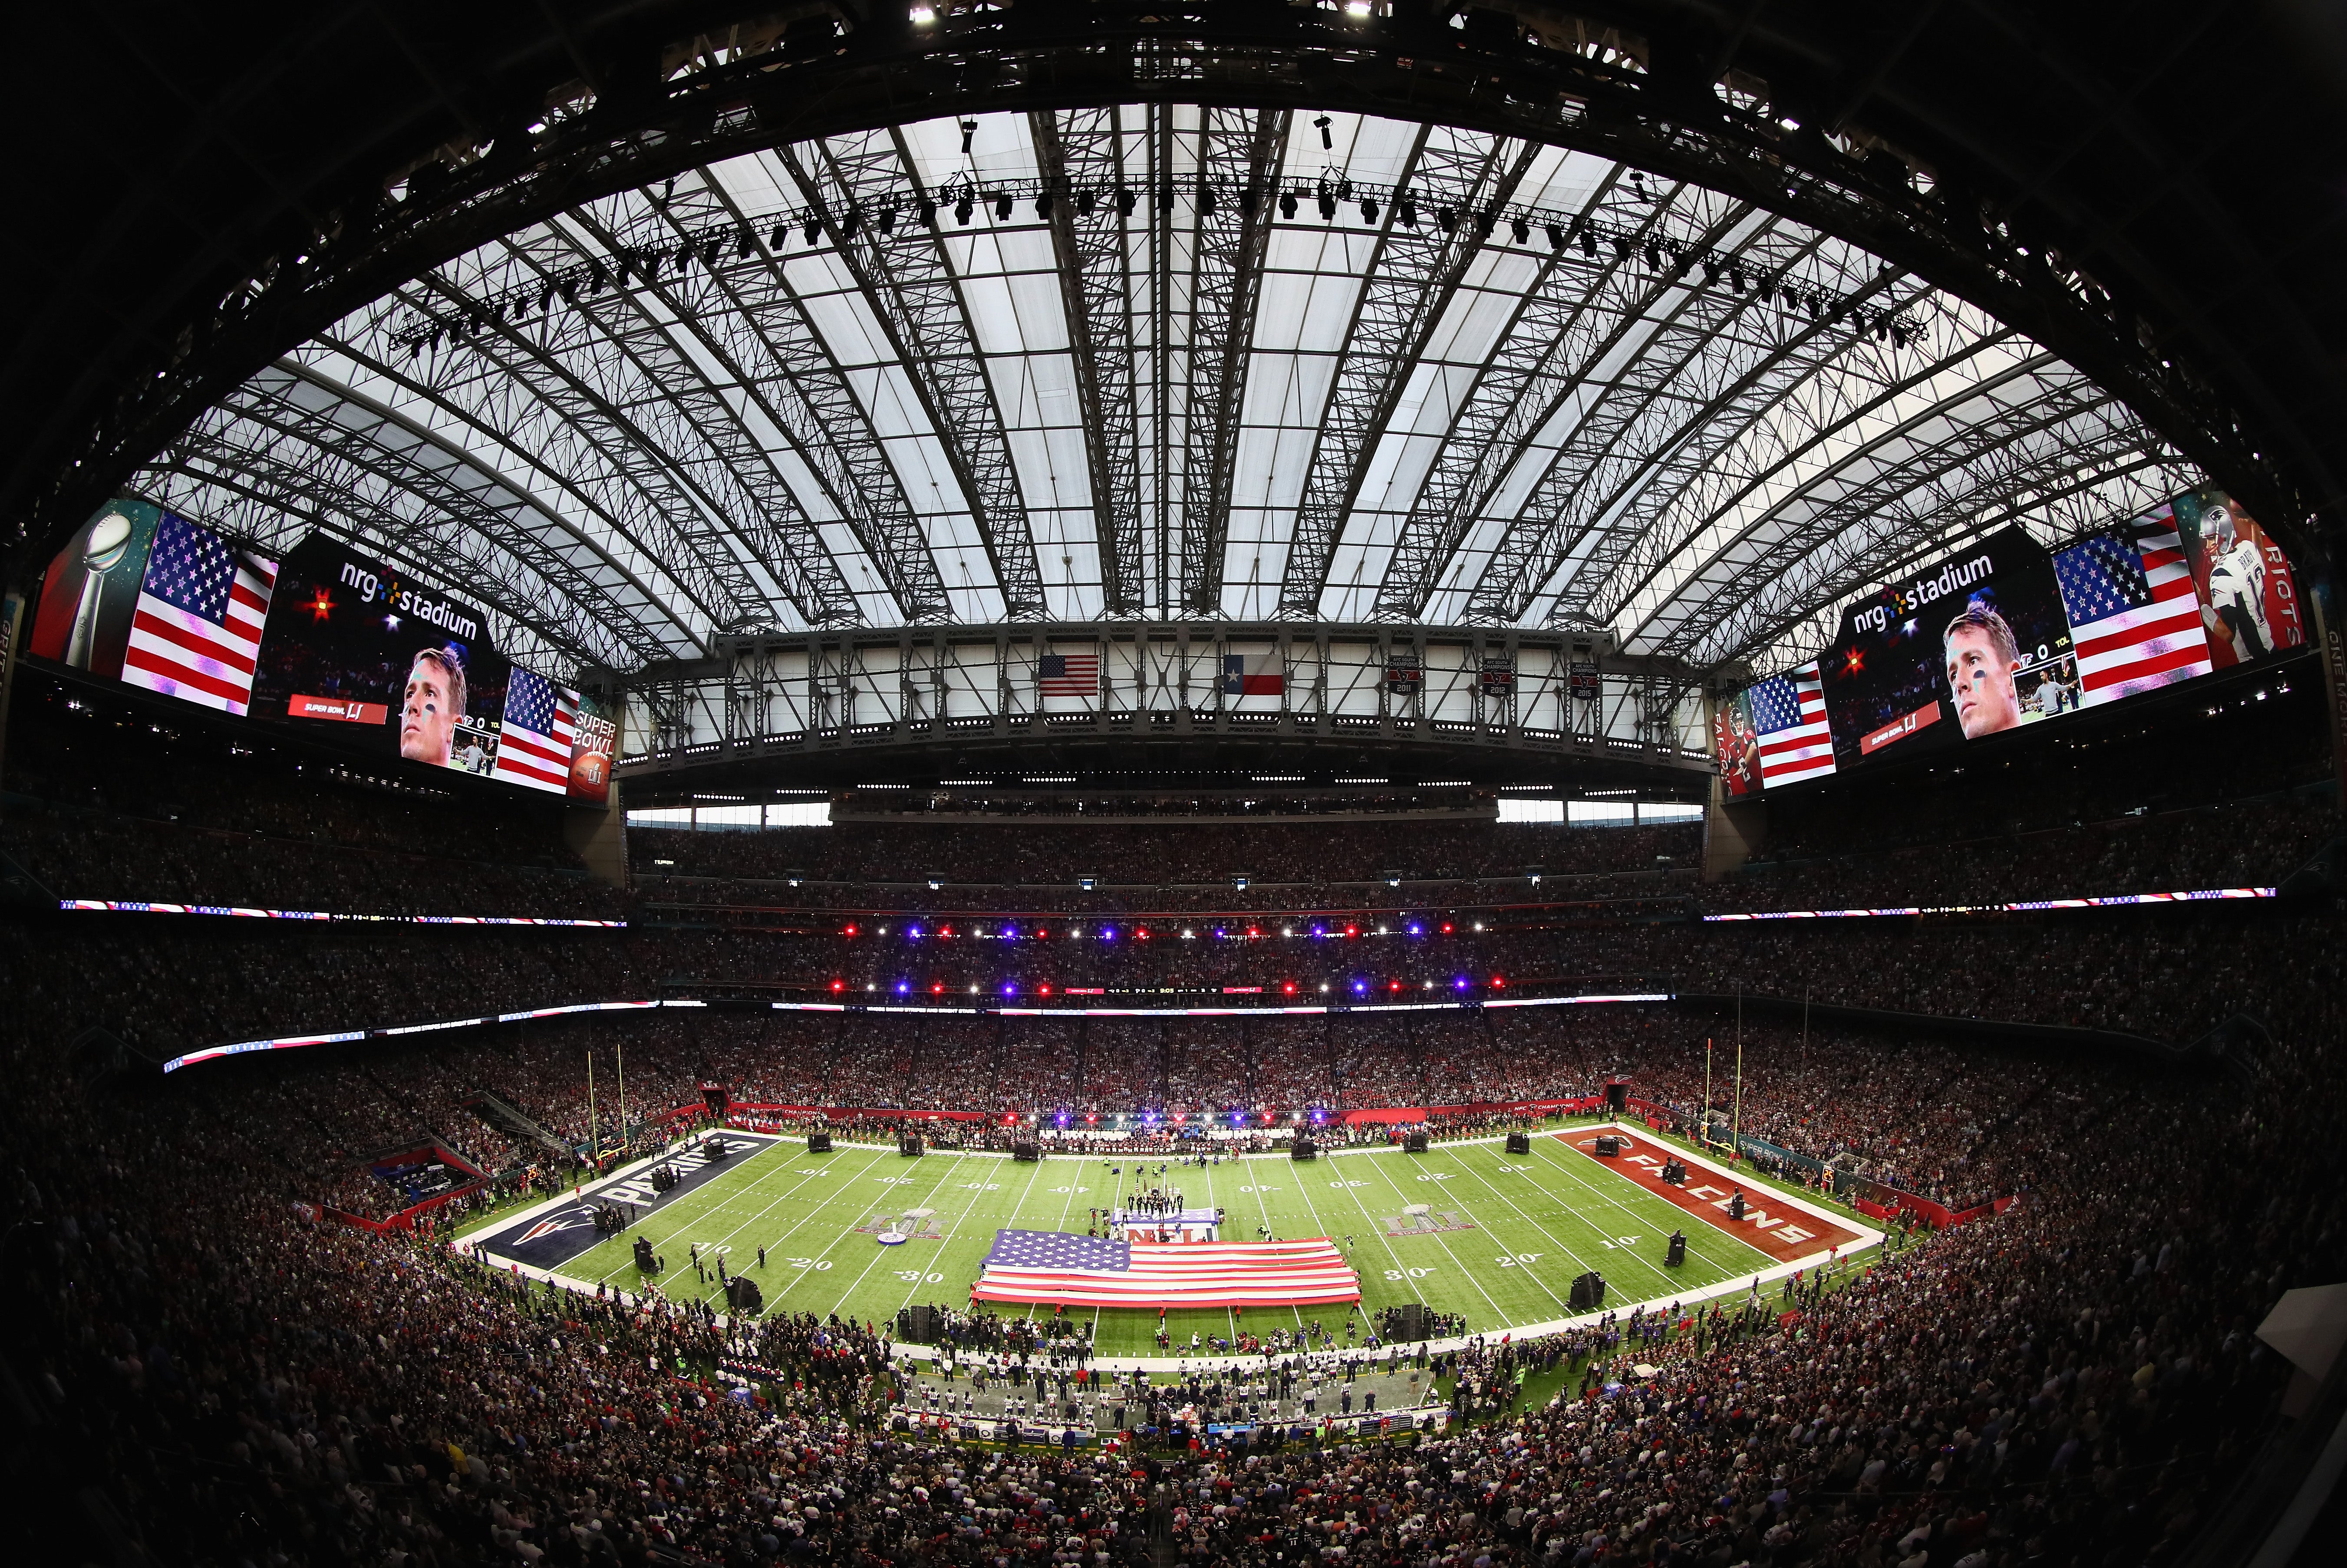 The NRG Statium in Houston, Texas prior to Super Bowl 51 between the New England Patriots and the Atlanta Falcons at NRG Stadium on February 5, 2017